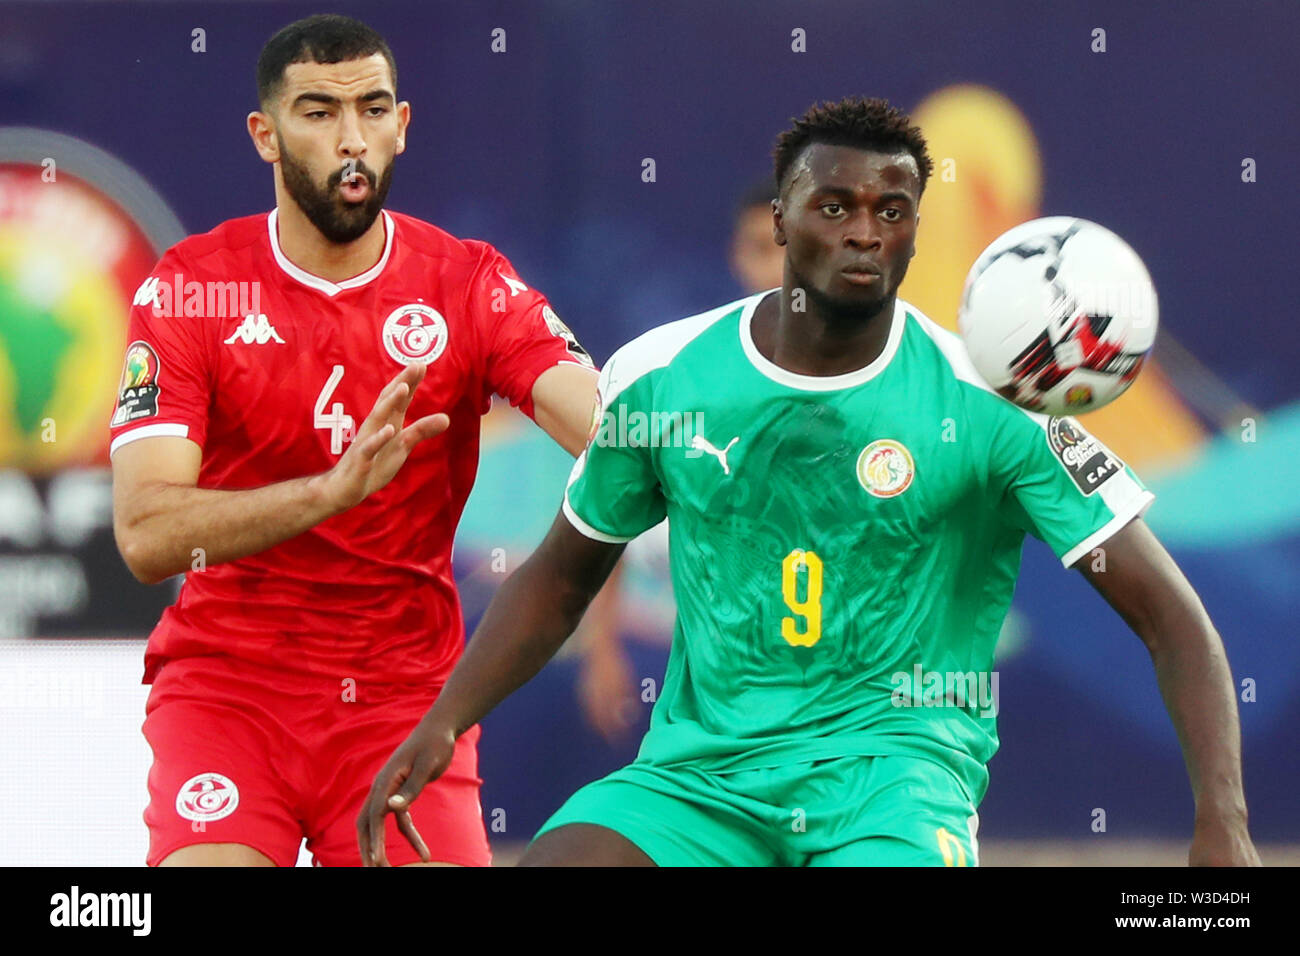 Cairo. 14th July, 2019. Senegal's Mbaye Niang (R) vies with Tunisia's Yassine Meriah during the semifinal match at the 2019 Africa Cup of Nations in Cairo, Egypt on July 14, 2019. Senegal won 1-0 and advanced to the final. Credit: Ahmed Gomaa/Xinhua/Alamy Live News Stock Photo